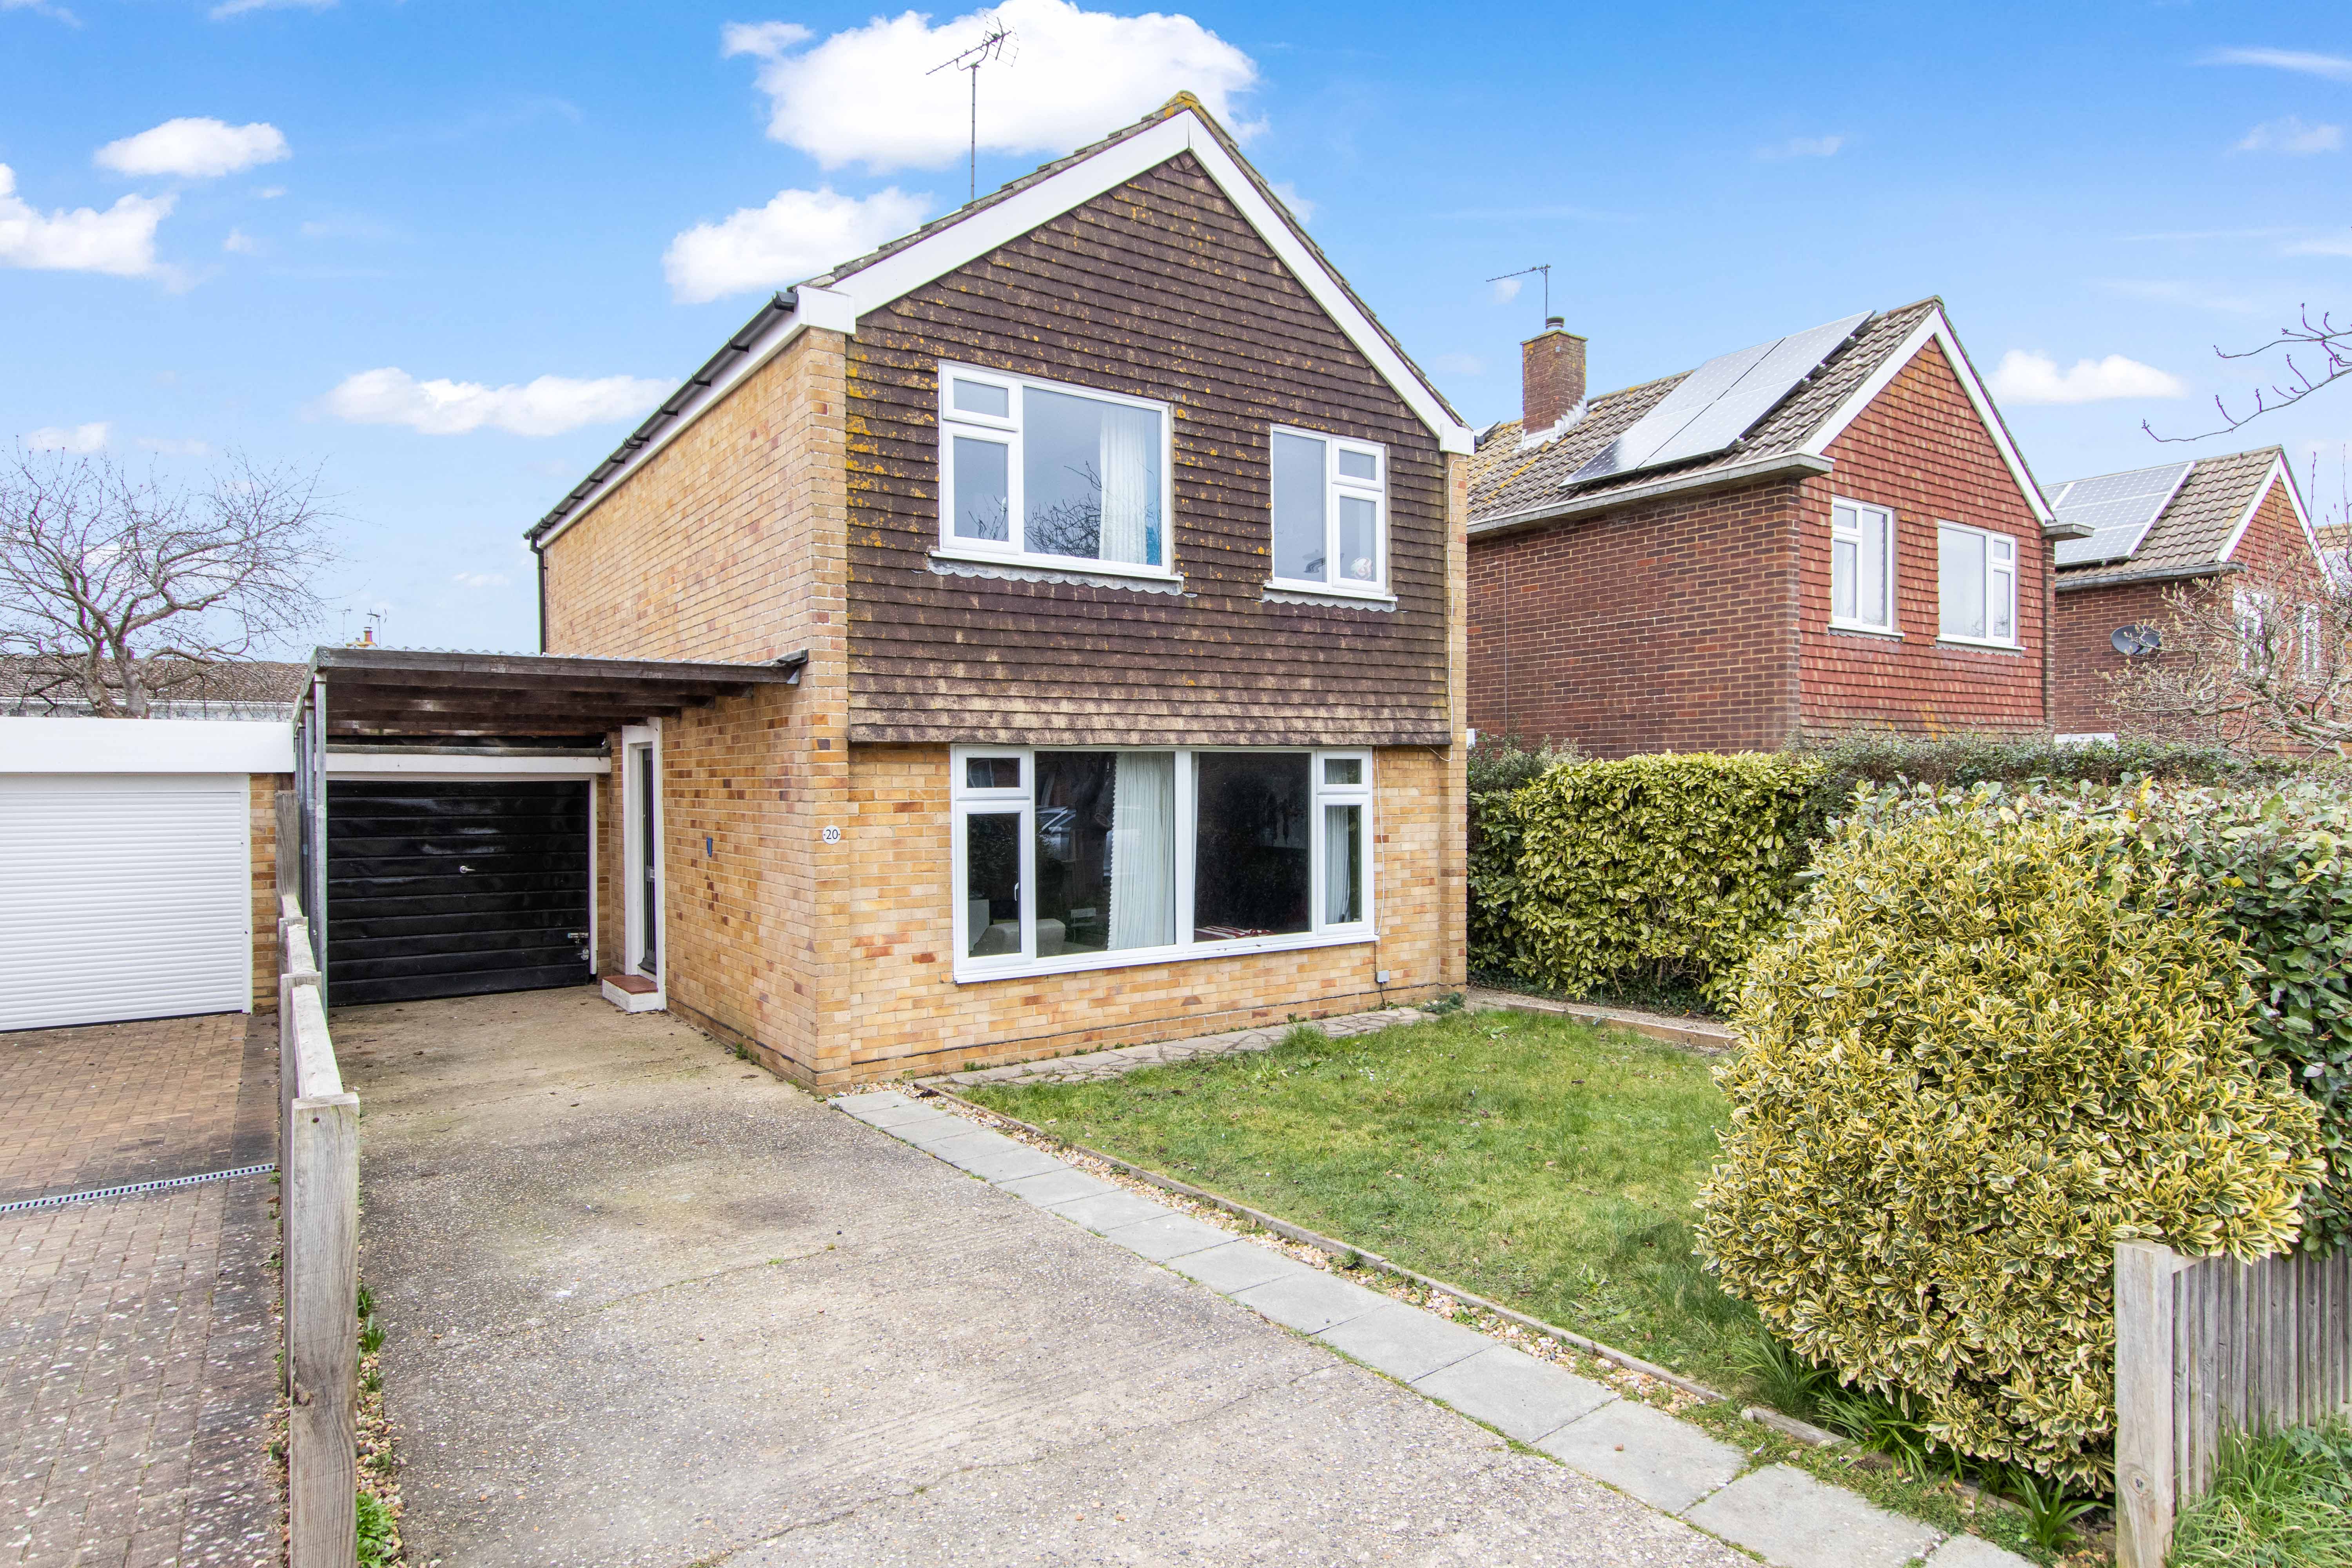 3 bed house for sale in Southfields Close, Chichester - Property Image 1